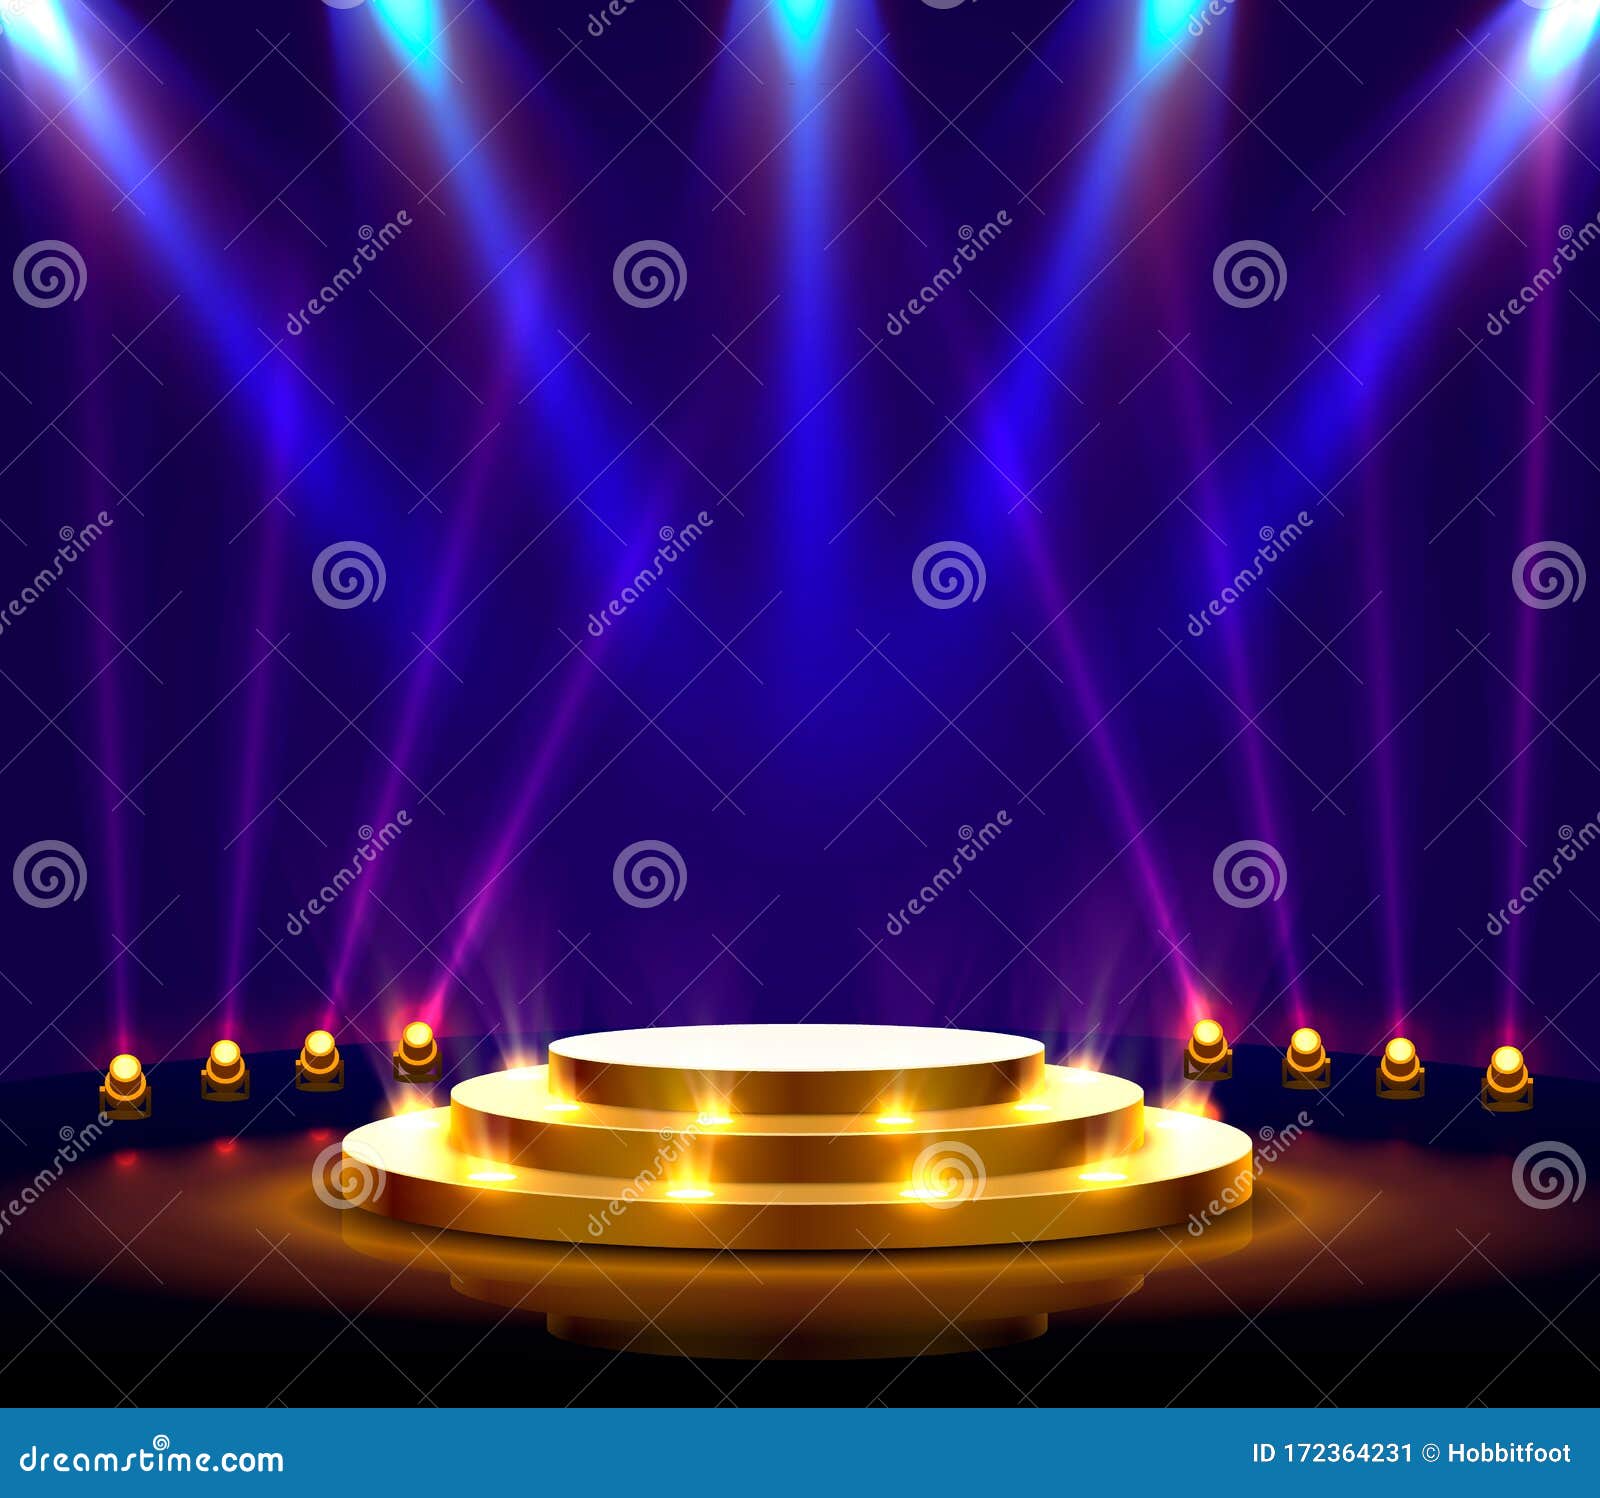 Award Ceremony Background Stock Illustrations – 45,484 Award Ceremony  Background Stock Illustrations, Vectors & Clipart - Dreamstime